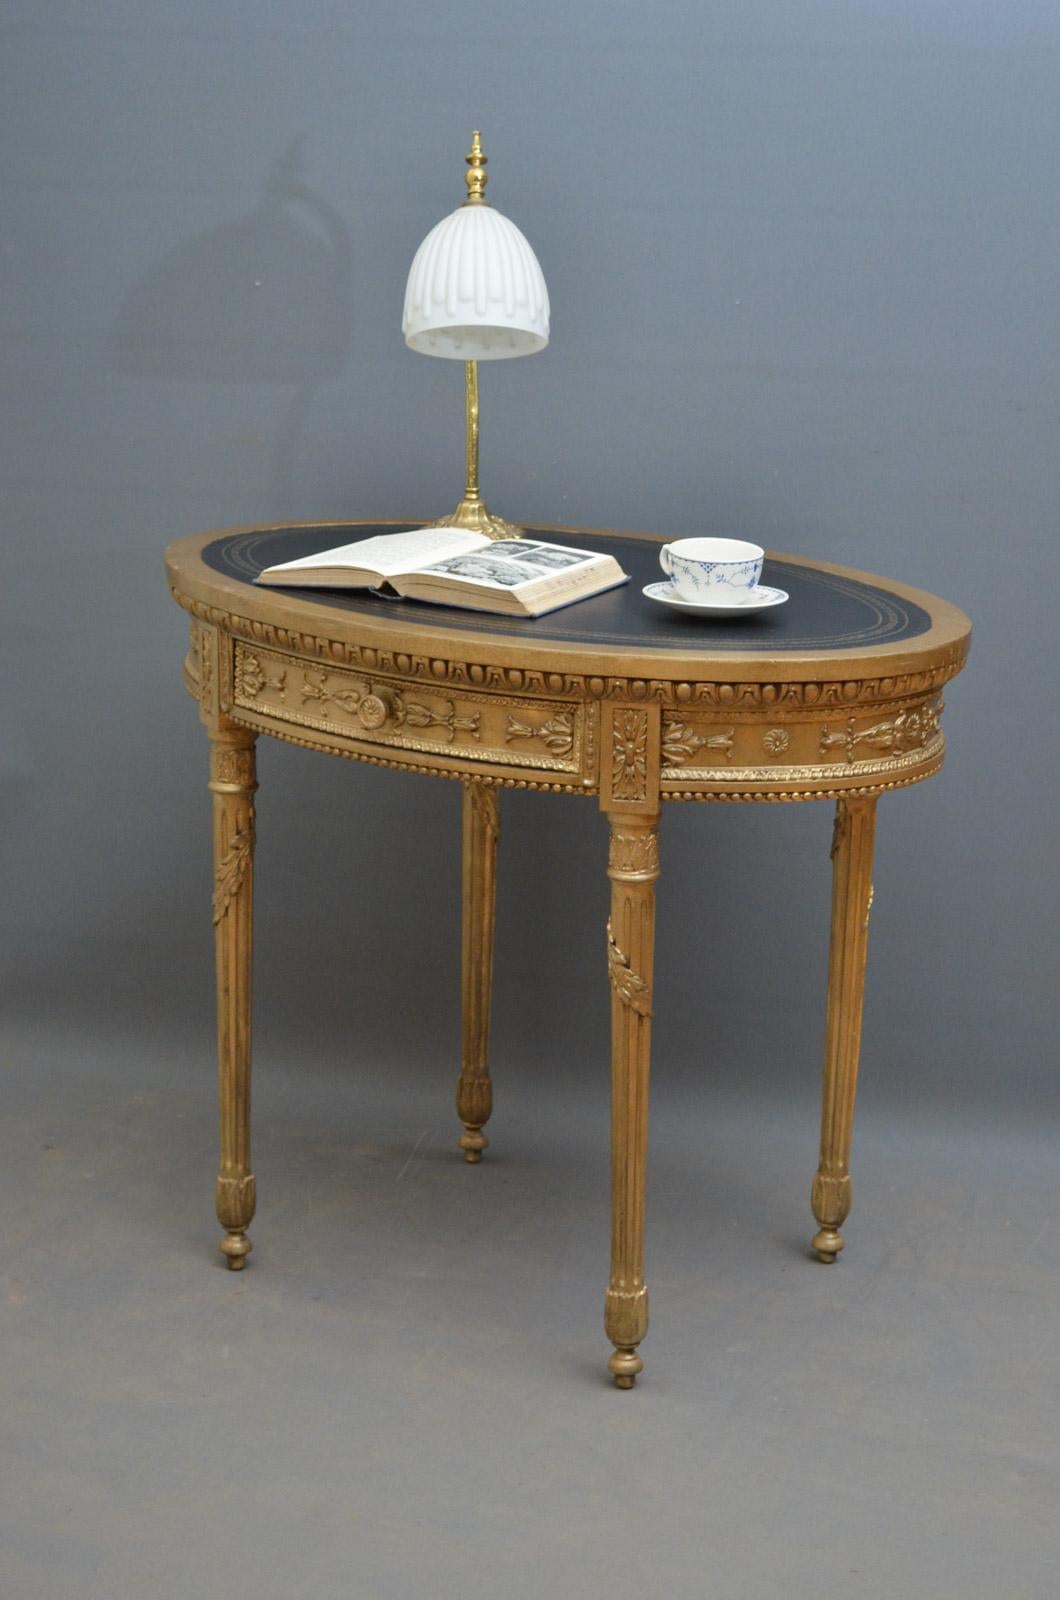 Sn3644, elegant Victorian giltwood side table, writing table of oval design, having black tooled leather top with dart and egg carved edge and finely carved frieze with practical drawers, all standing on slender, fluted legs with leafy carving